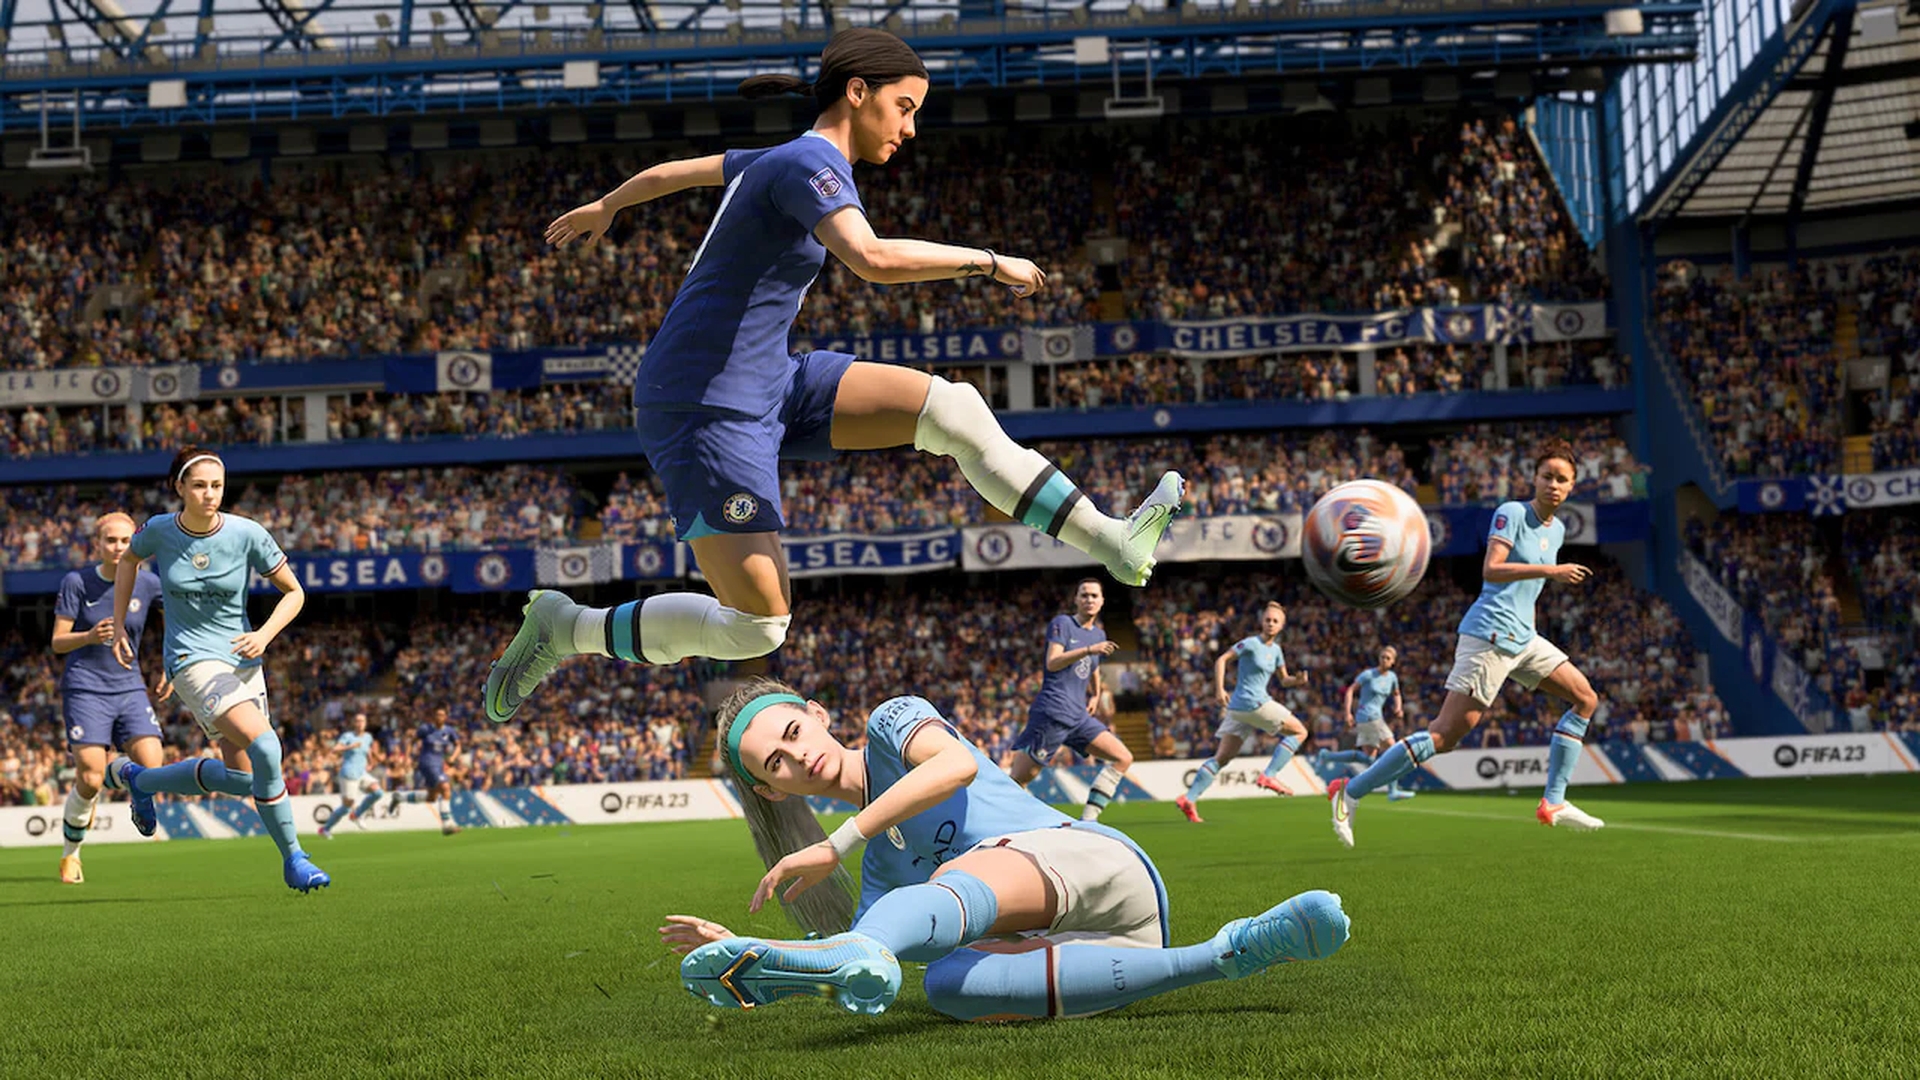 FIFA 23 The Matchday Experience trailer explains the game's enhanced features and what is to come to the final soccer game from EA under the FIFA title.